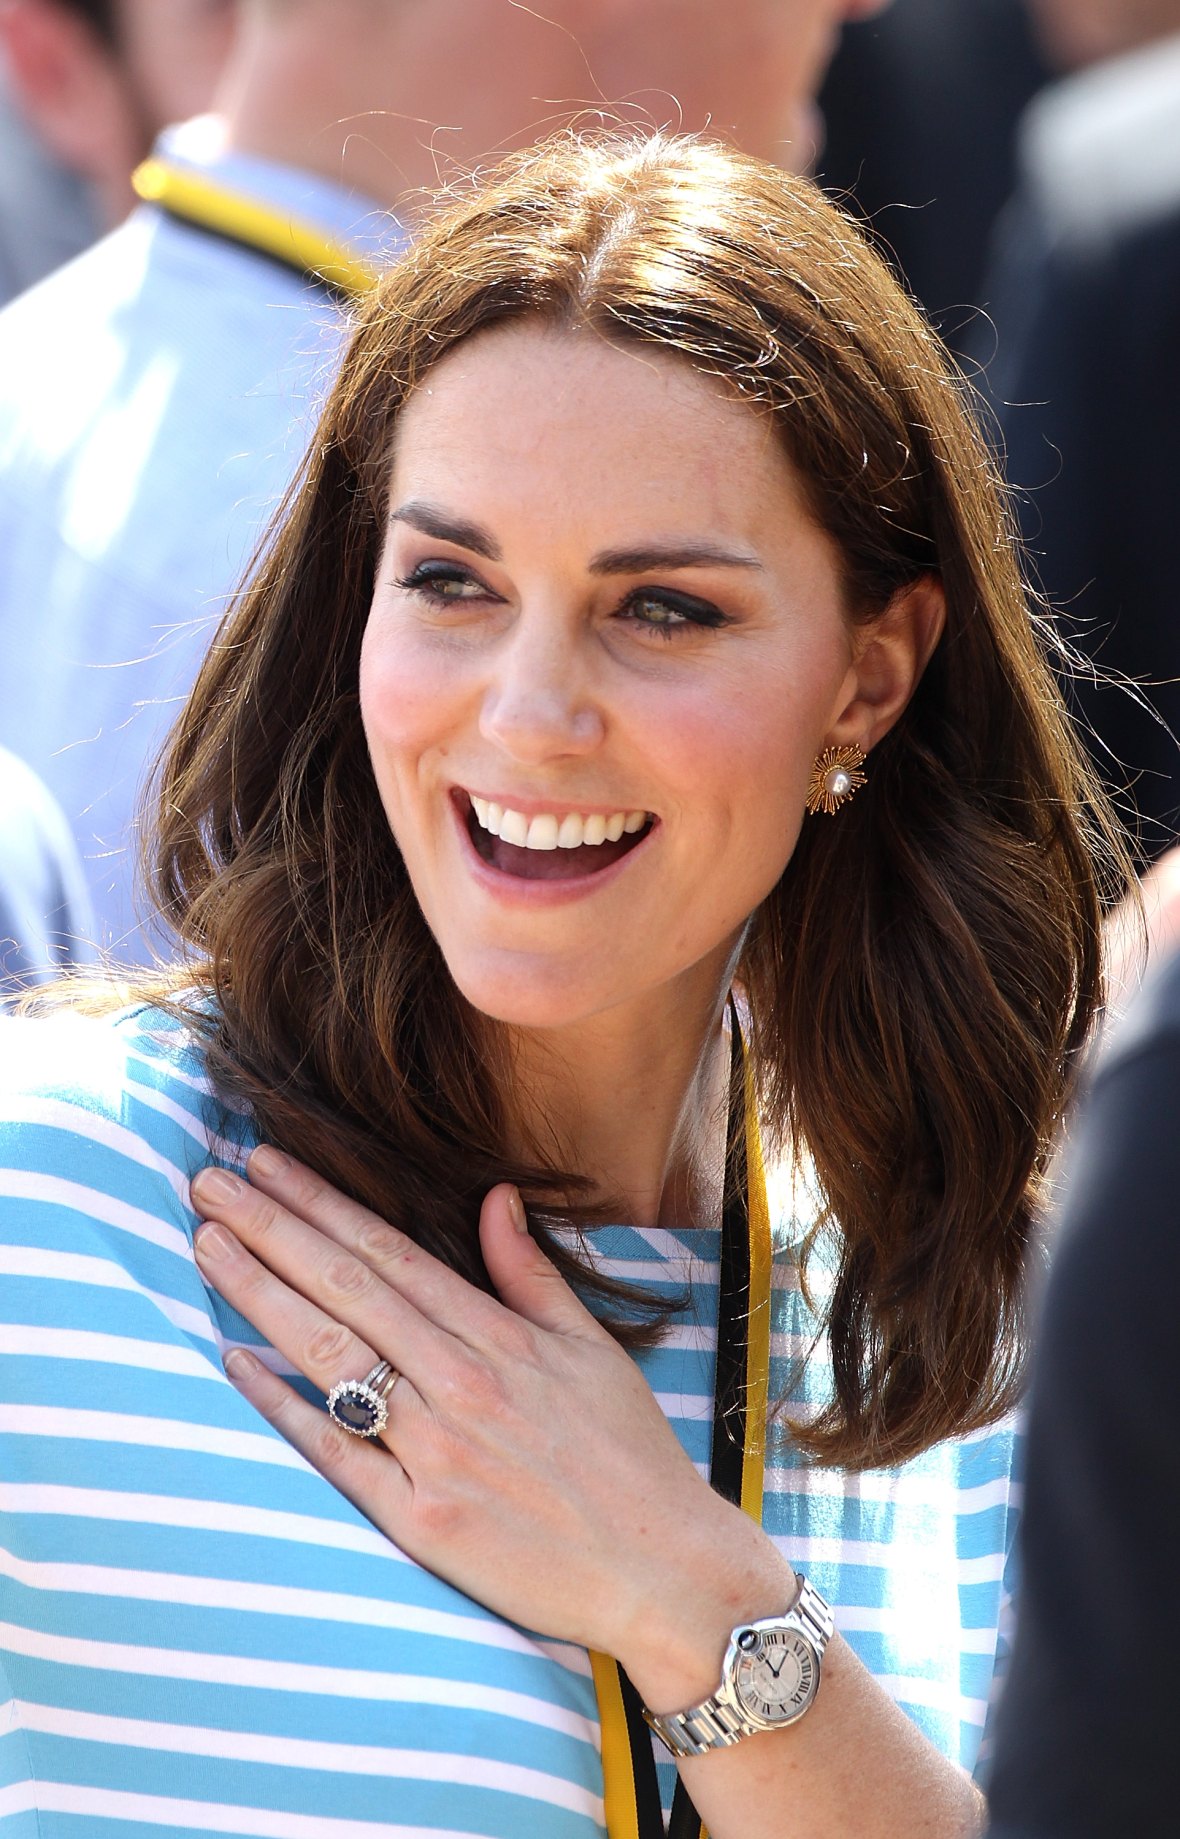 Kate Favorite Nail Polish is Essie's Ballet Slippers